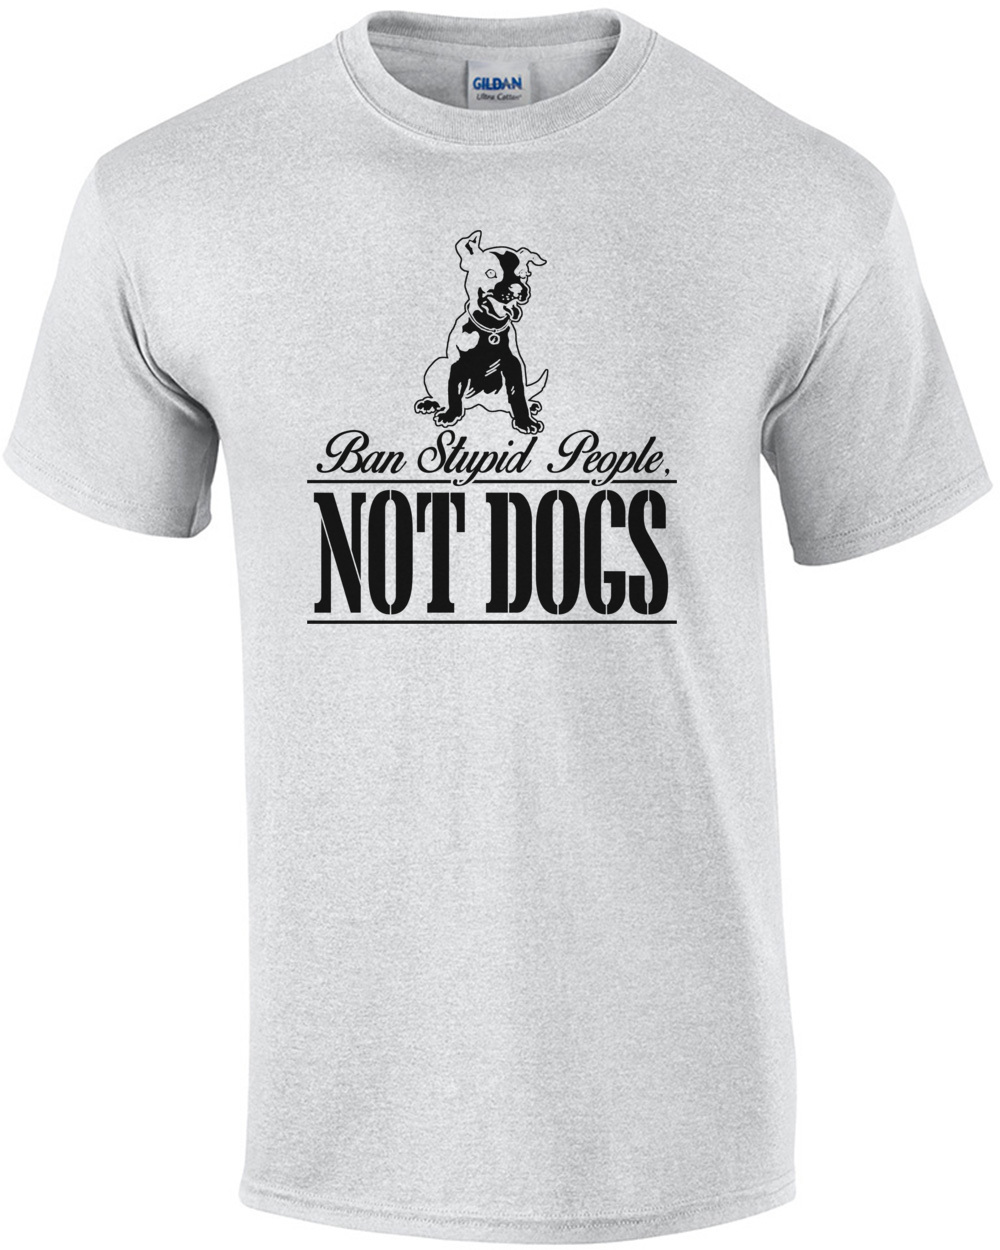 Ban Stupid People NOT Dogs Short Sleeve T-Shirt